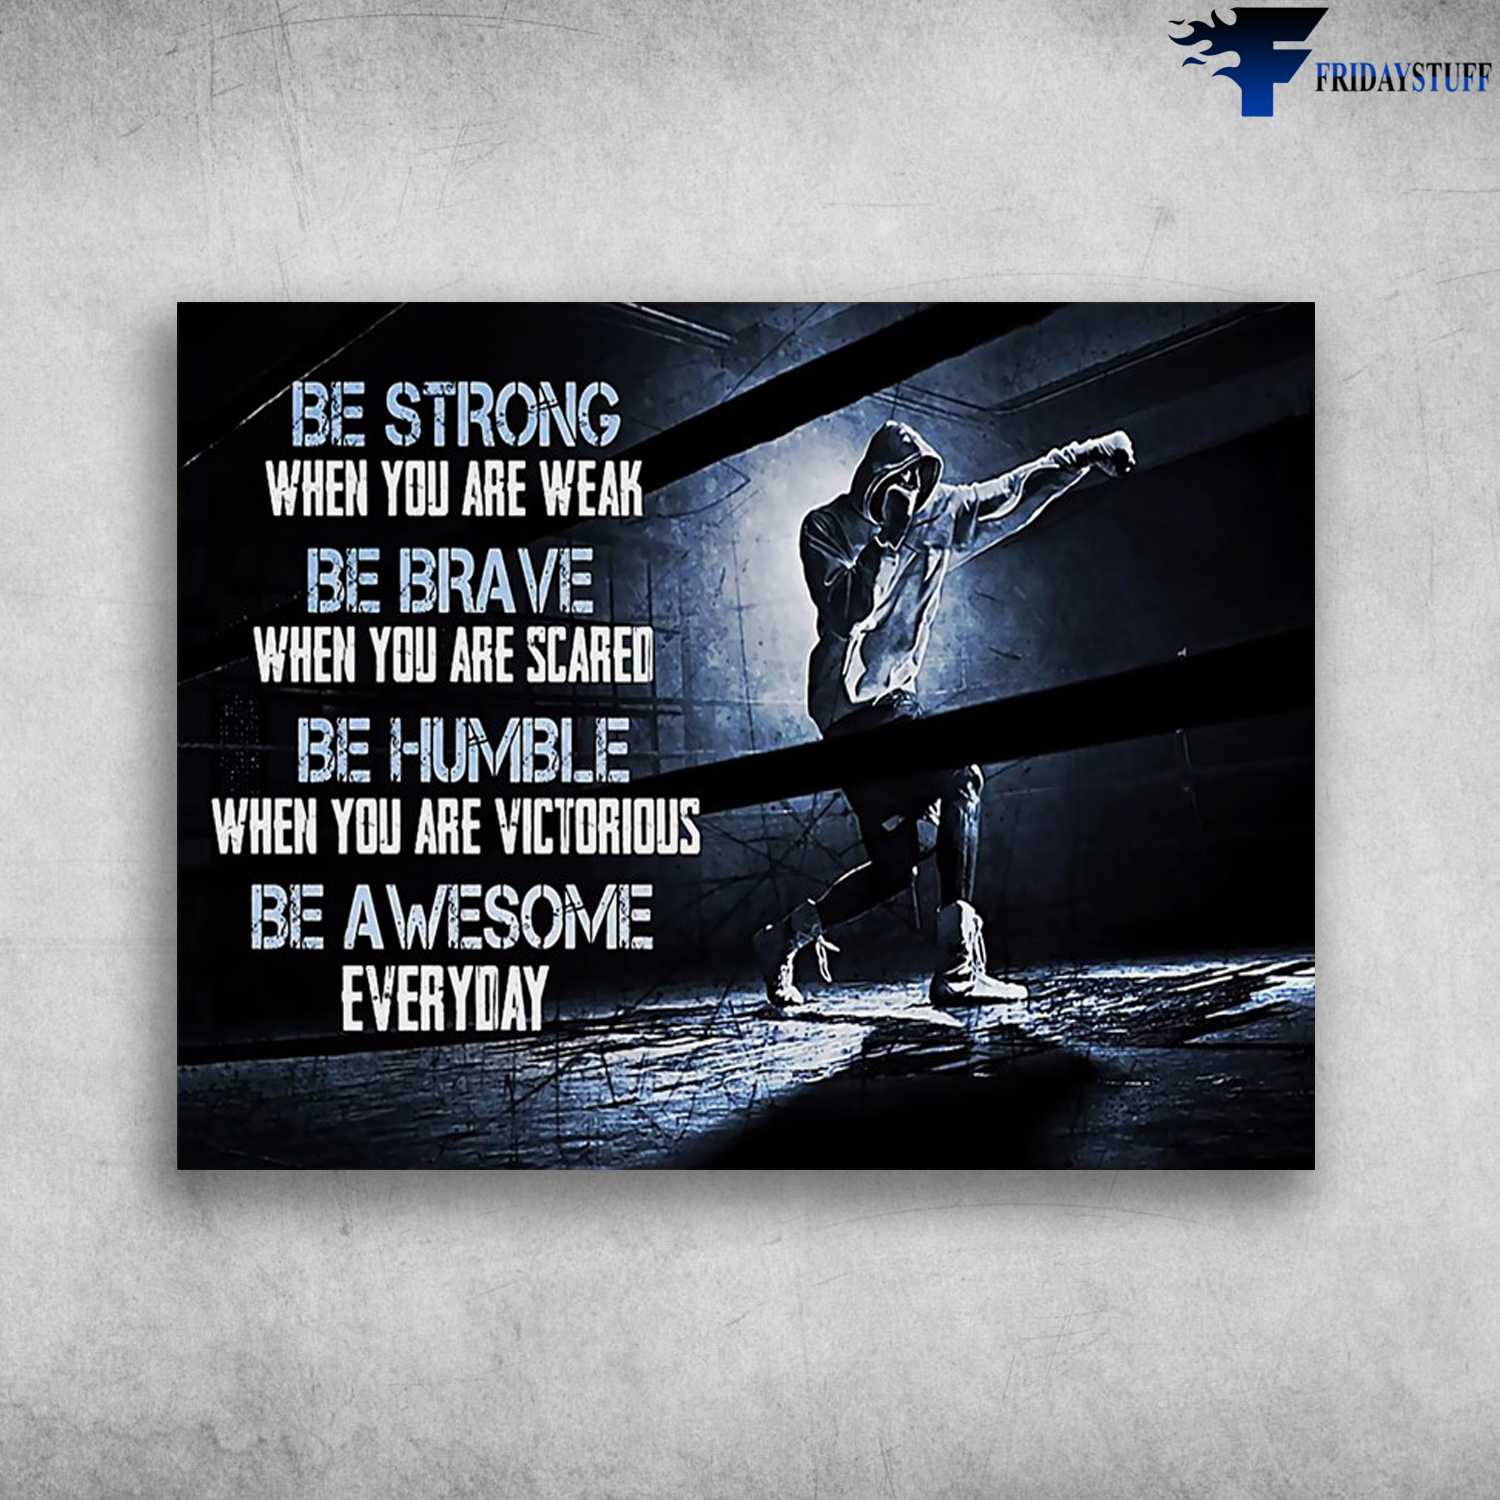 Boxing Lover, Boxing Practice - Be Strong When You Are Weak, Be Brave When You Are Scare, Be Humble When You Are Victorious, Be Awesome Everyday